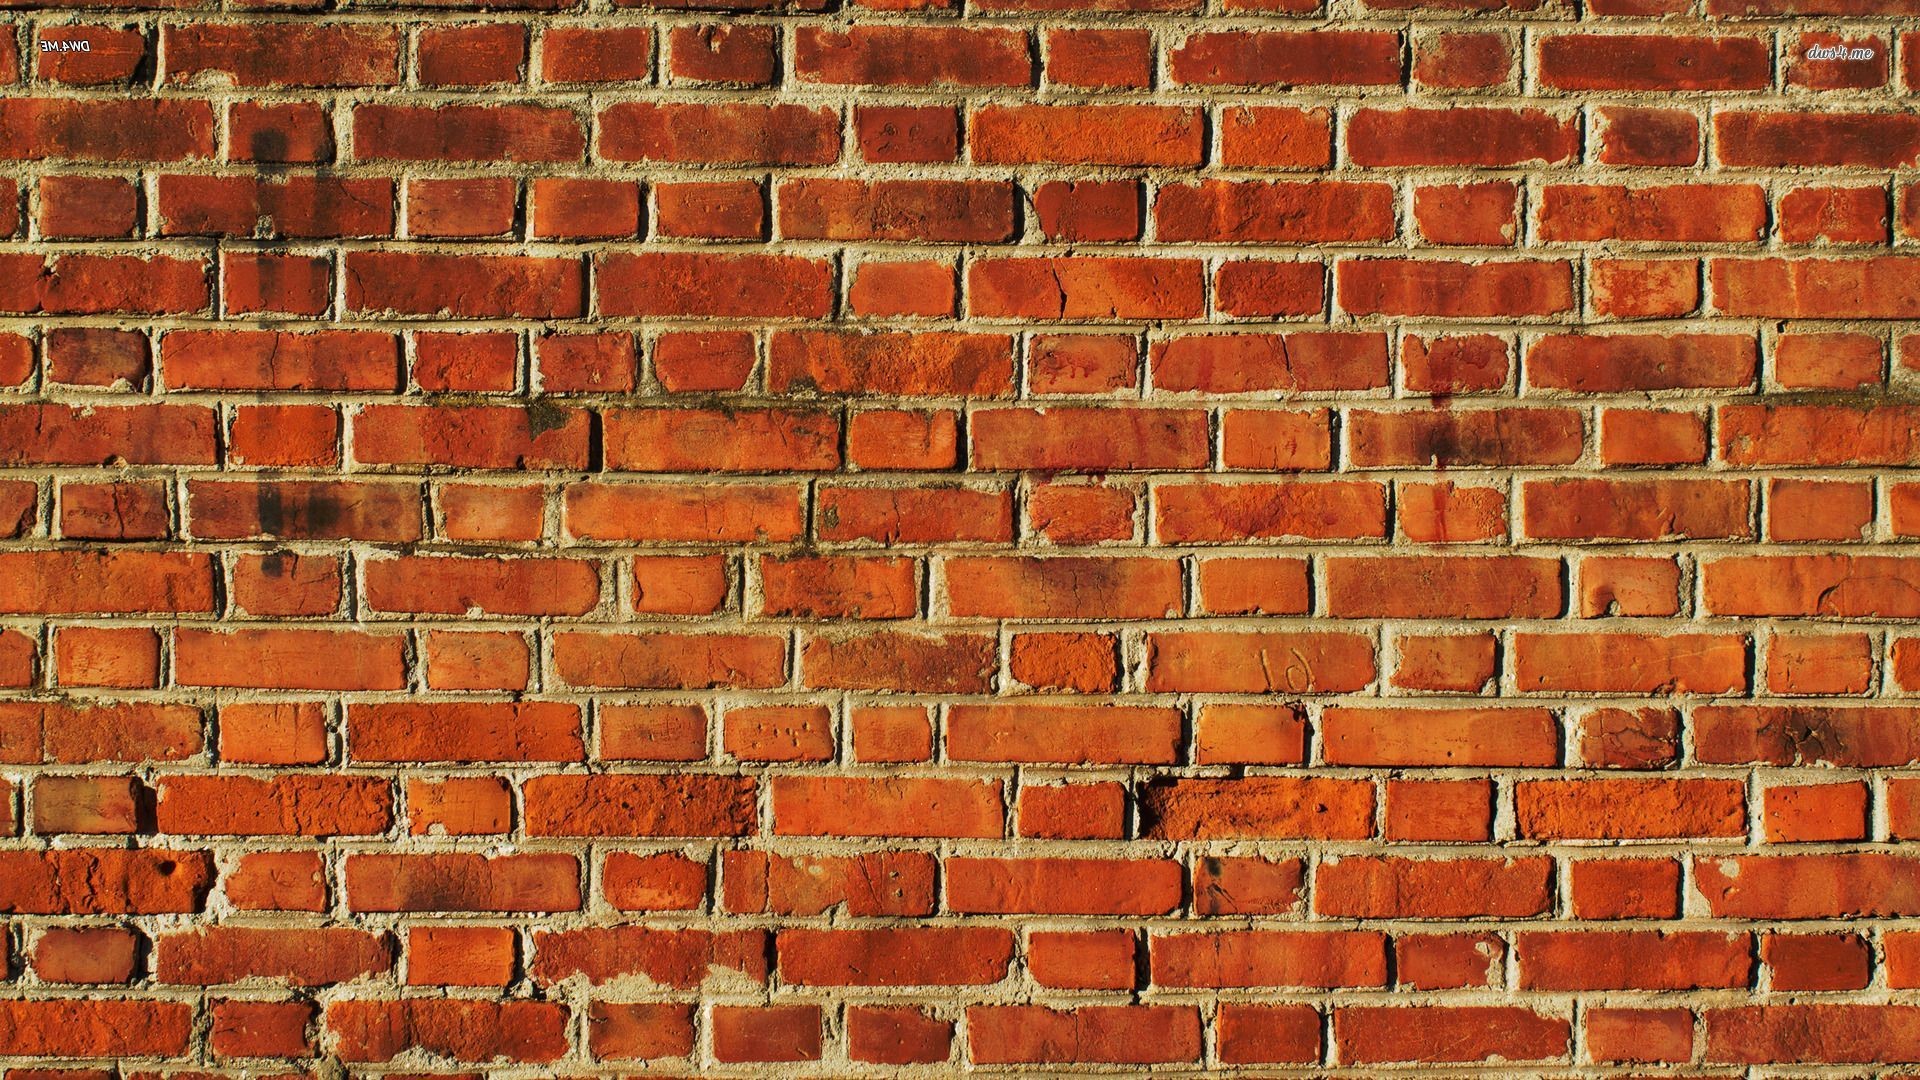 Brick wallpaper · Download free cool backgrounds for 